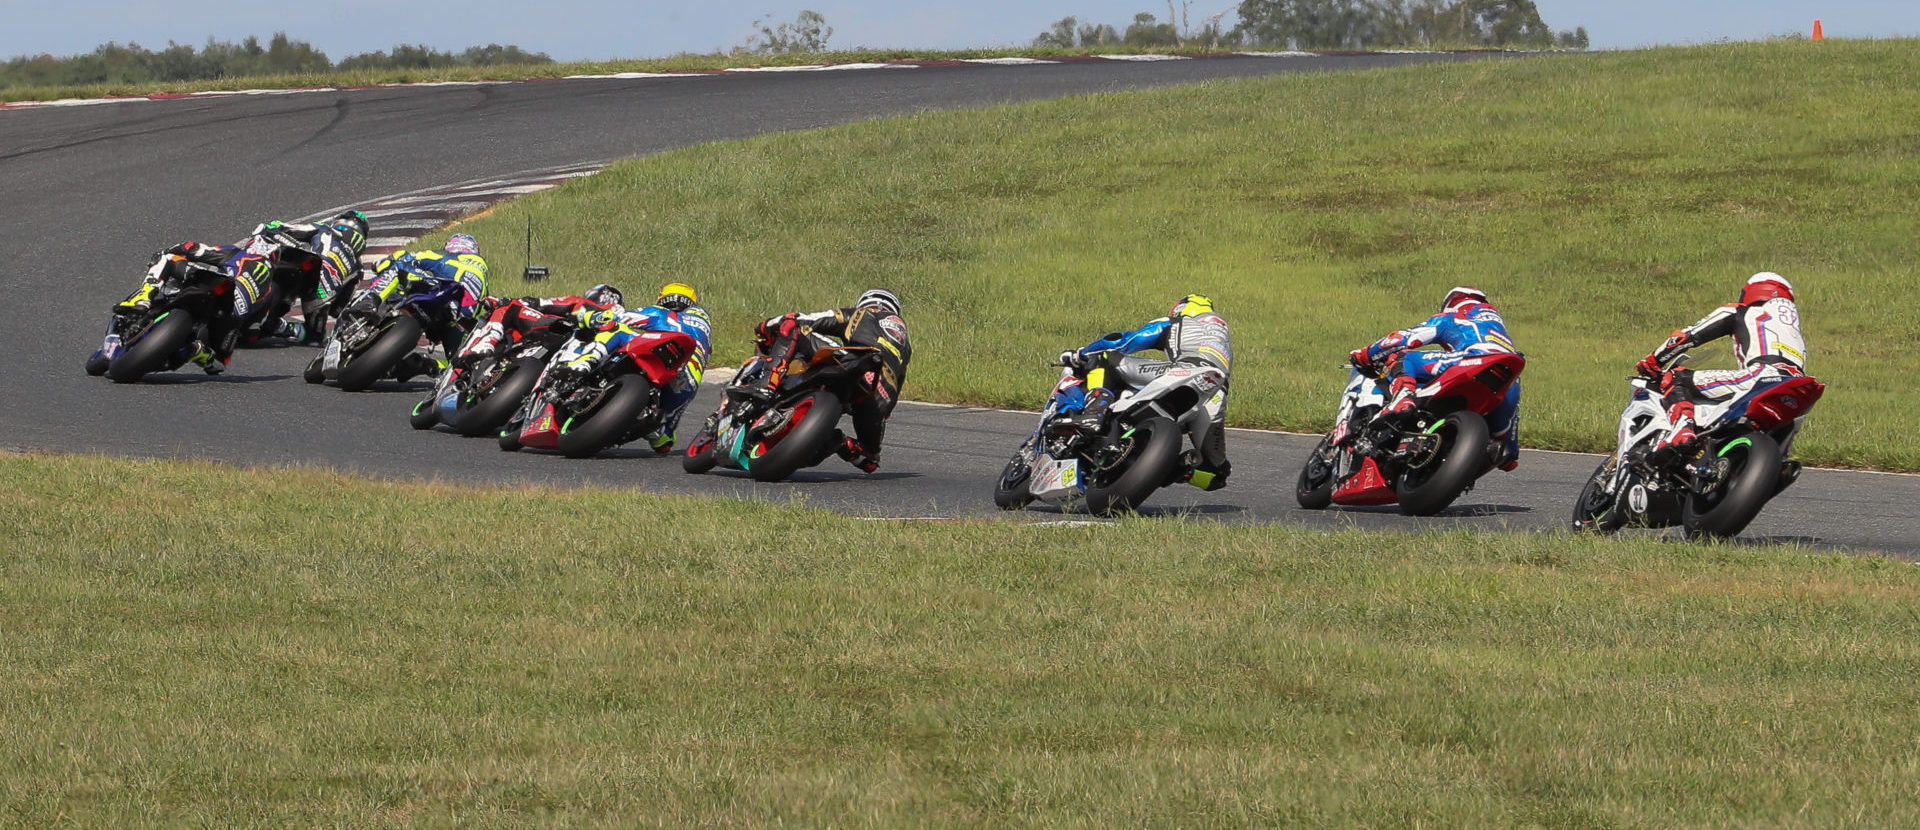 A MotoAmerica Superbike race start from 2019. Photo by Brian J. Nelson.